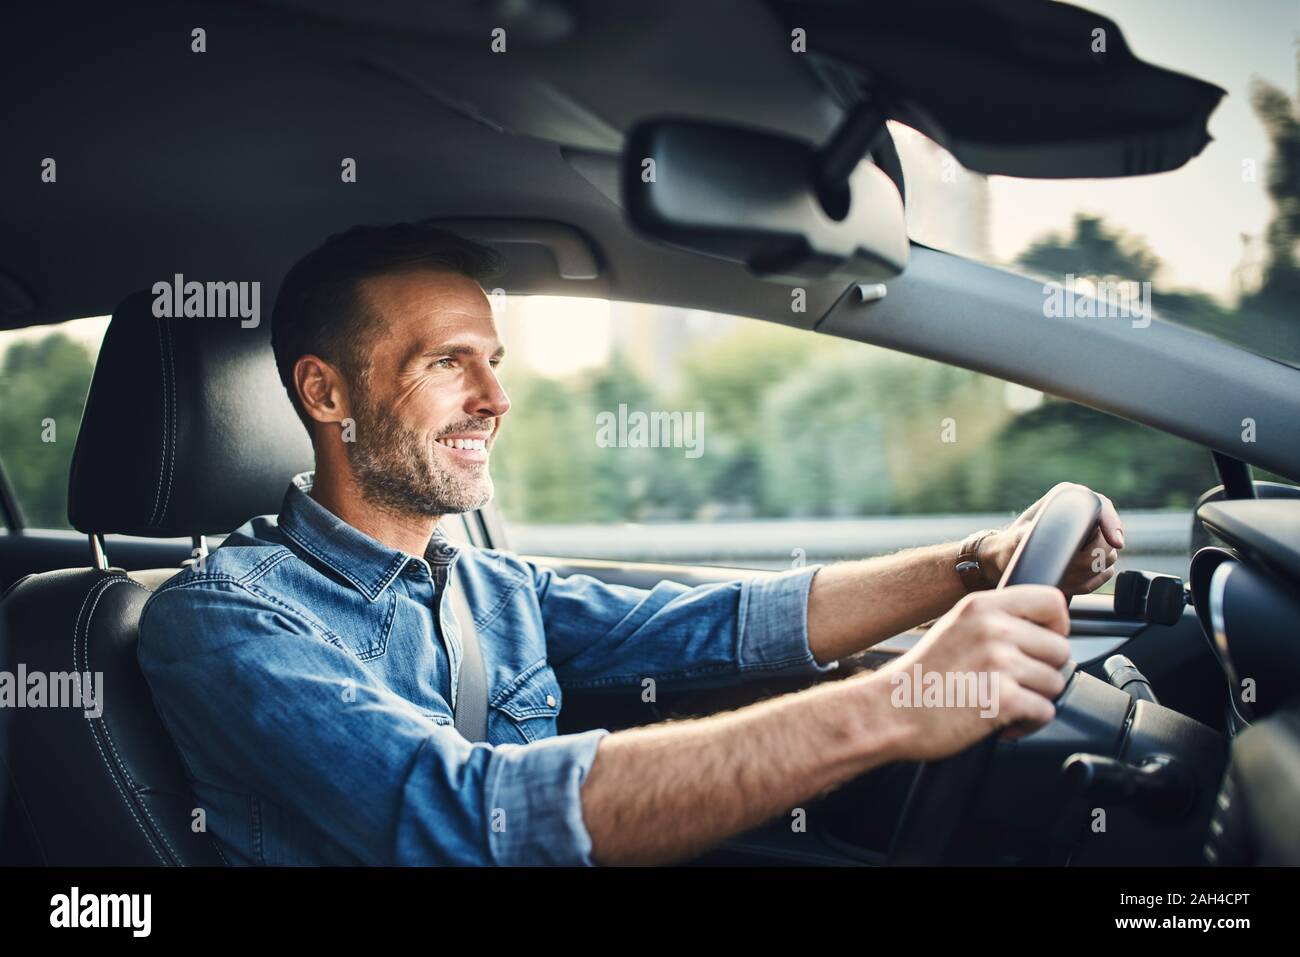 Handsome man driving a car Stock Photo